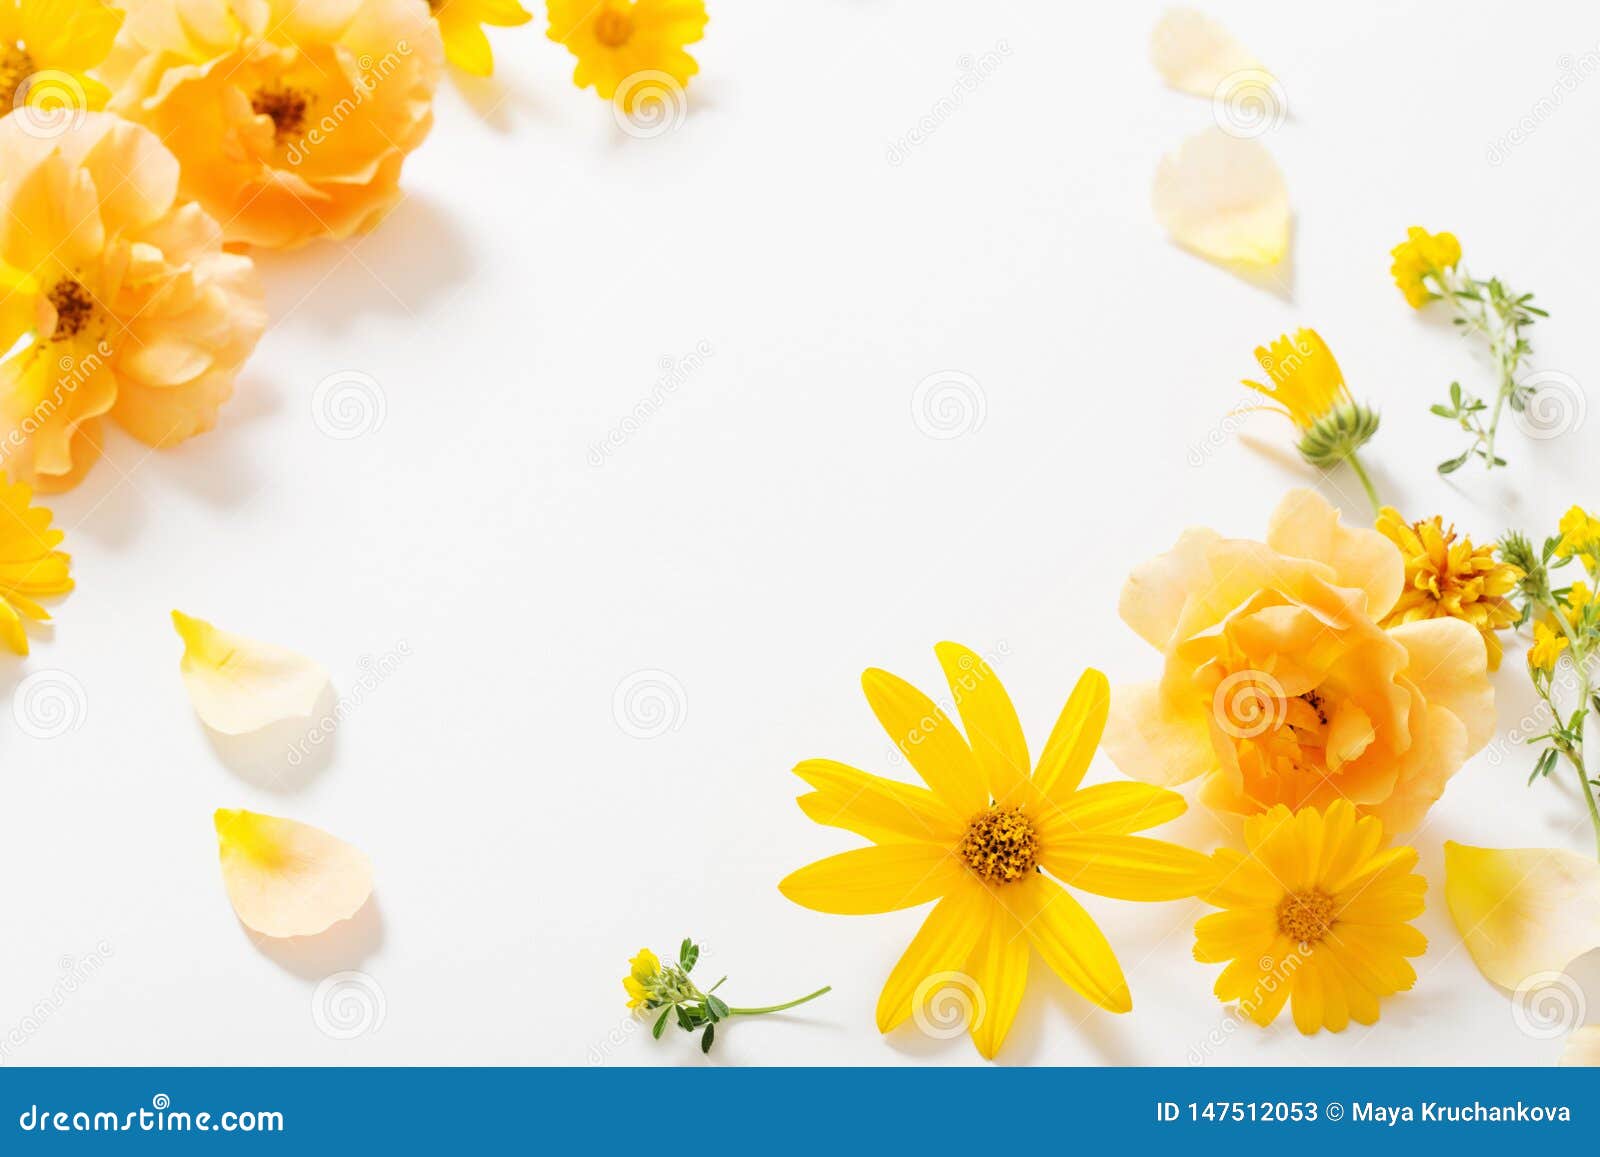 Yellow Flowers on White Background Stock Image - Image of fall, flower ...